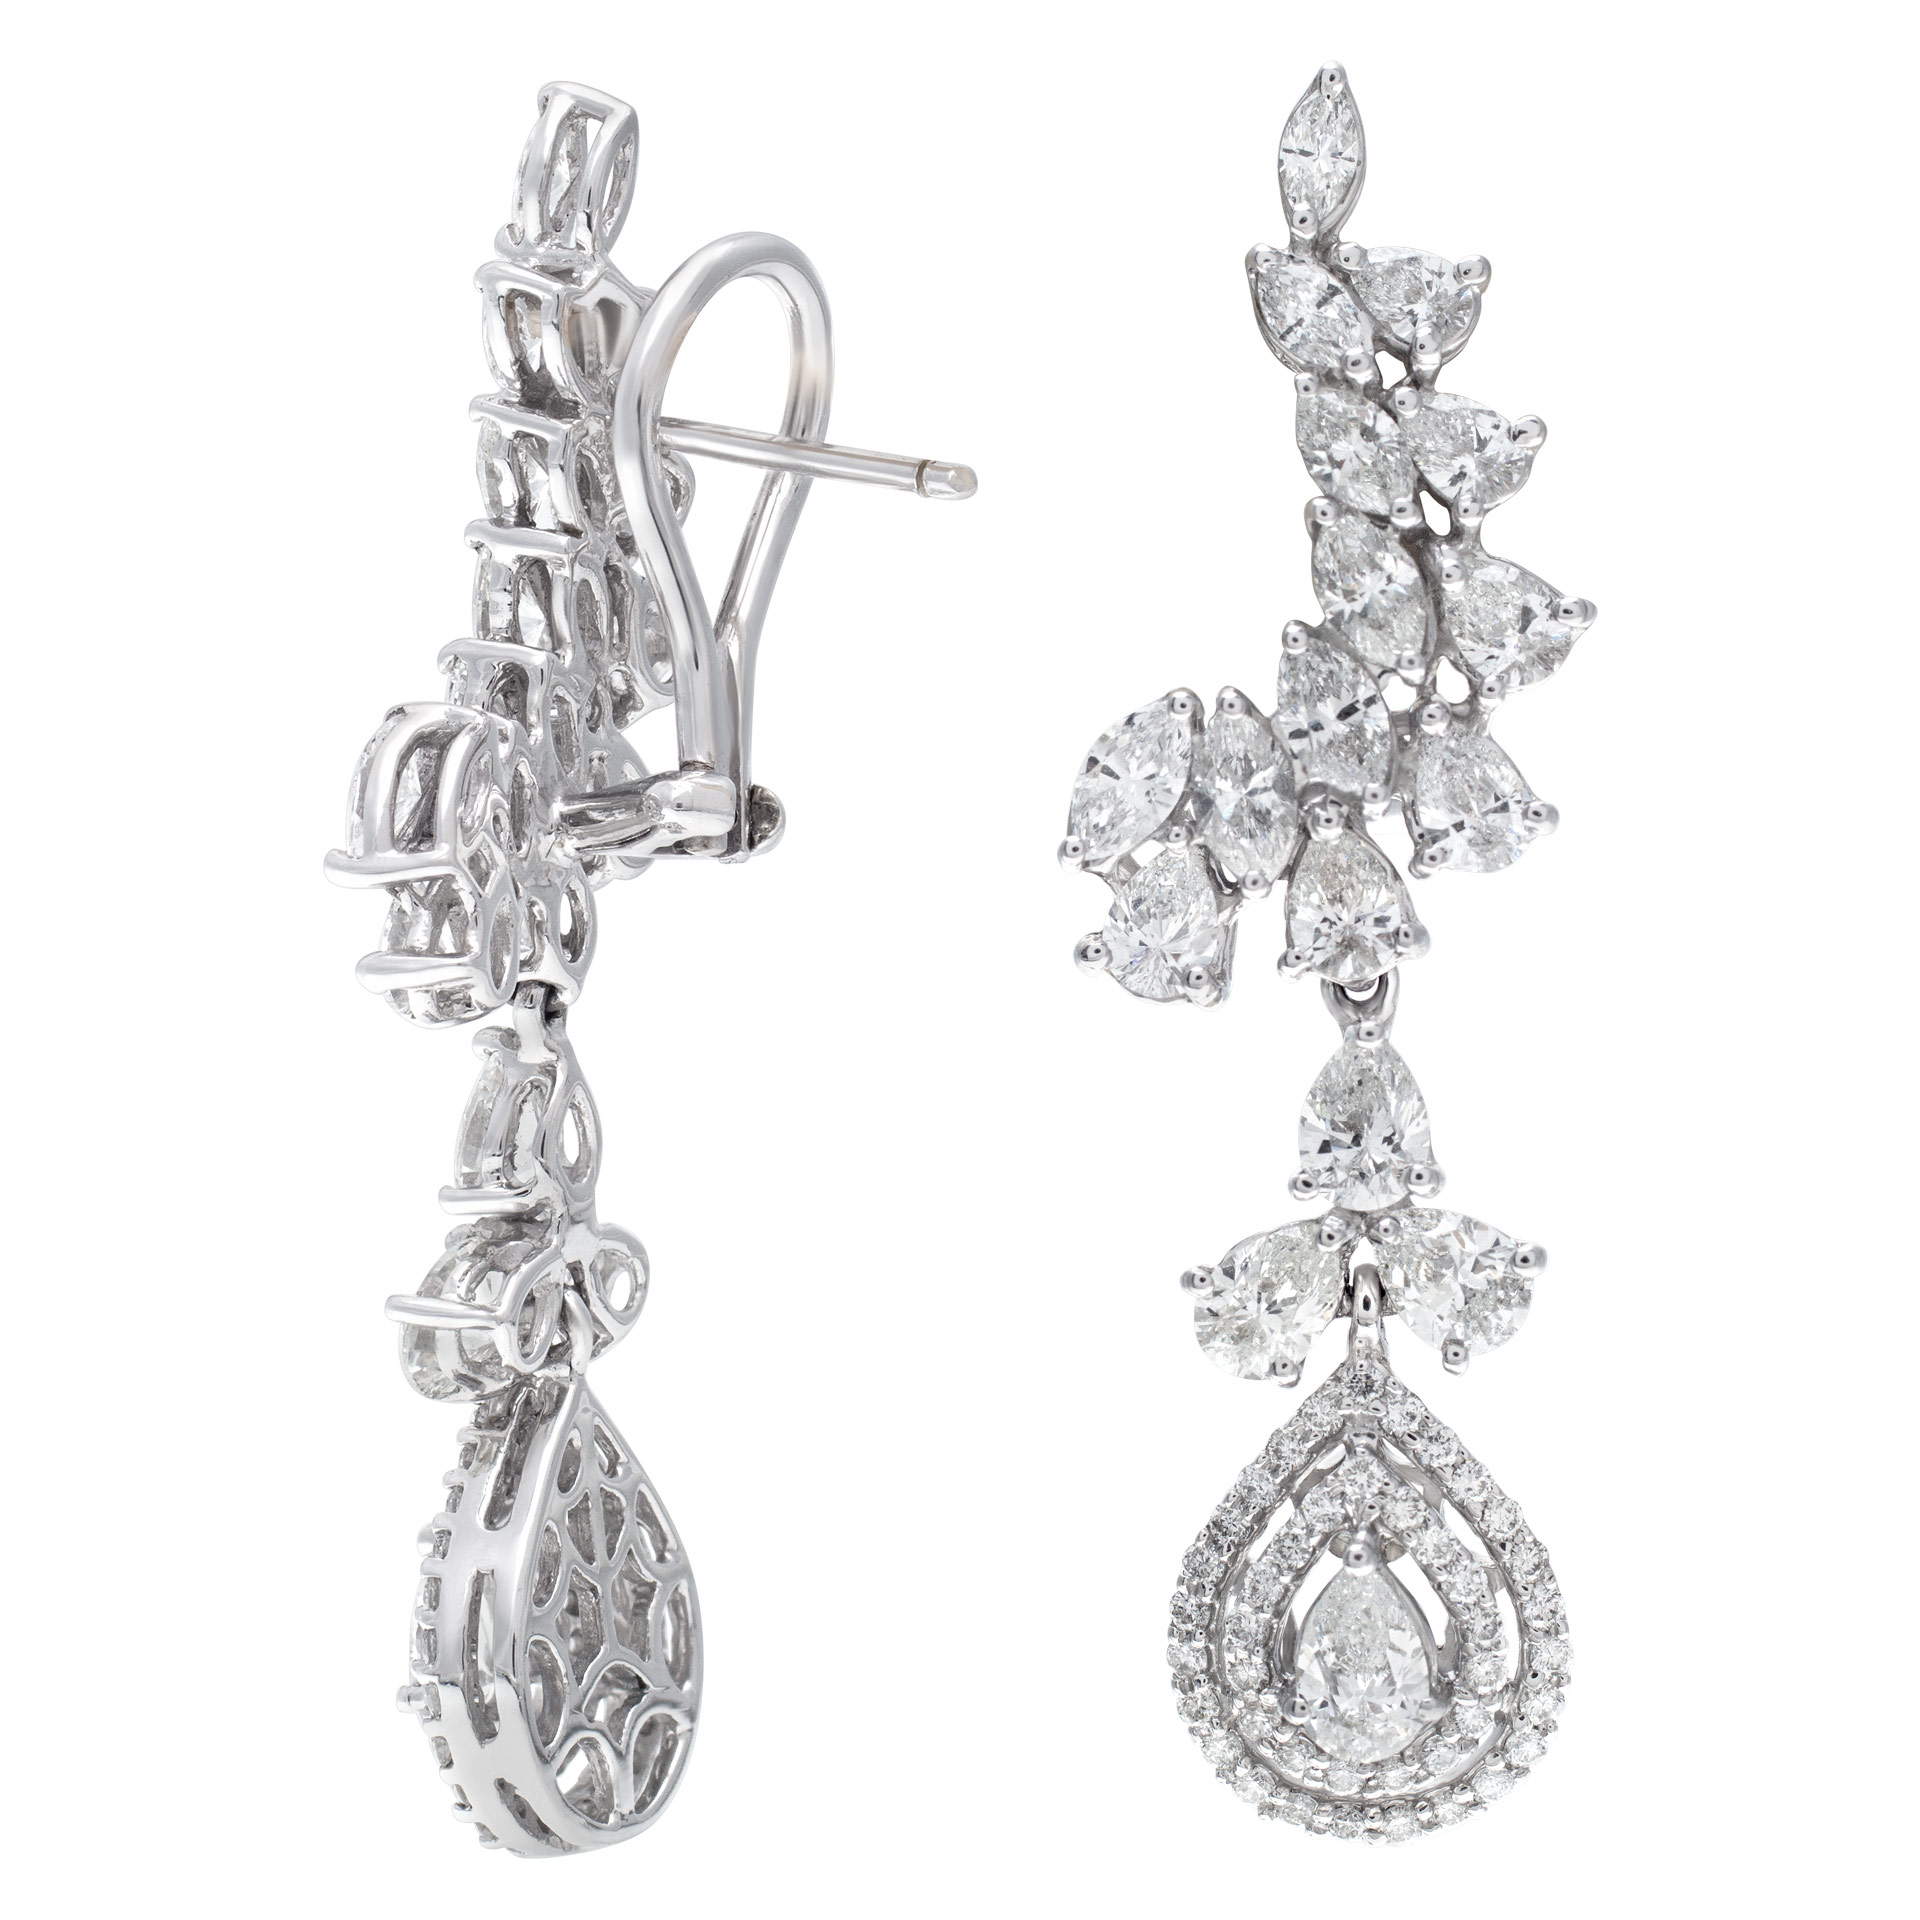 Brilliant marquise, pear, round cut diamond dangling earrings set in 18k white gold. Total diamonds approx. weight: 5.00 carats image 4